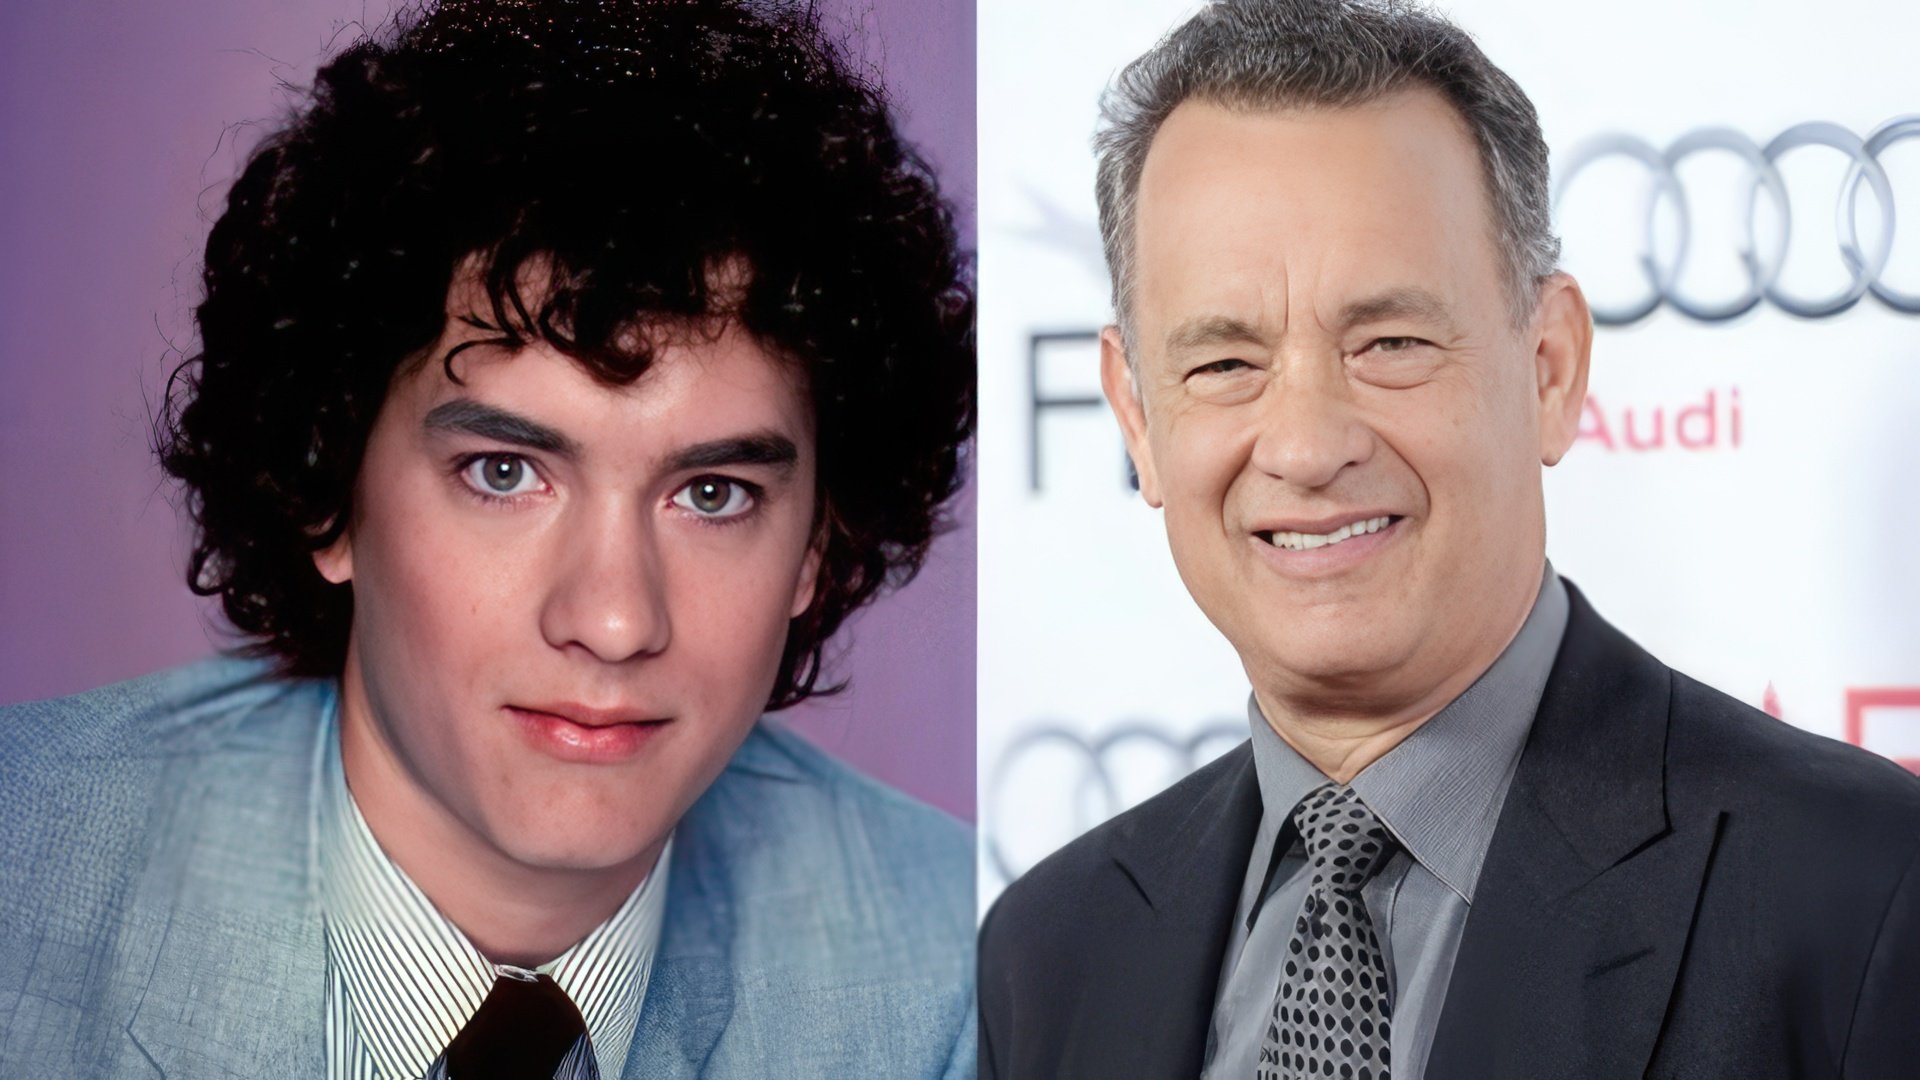 Tom Hanks in his youth and now